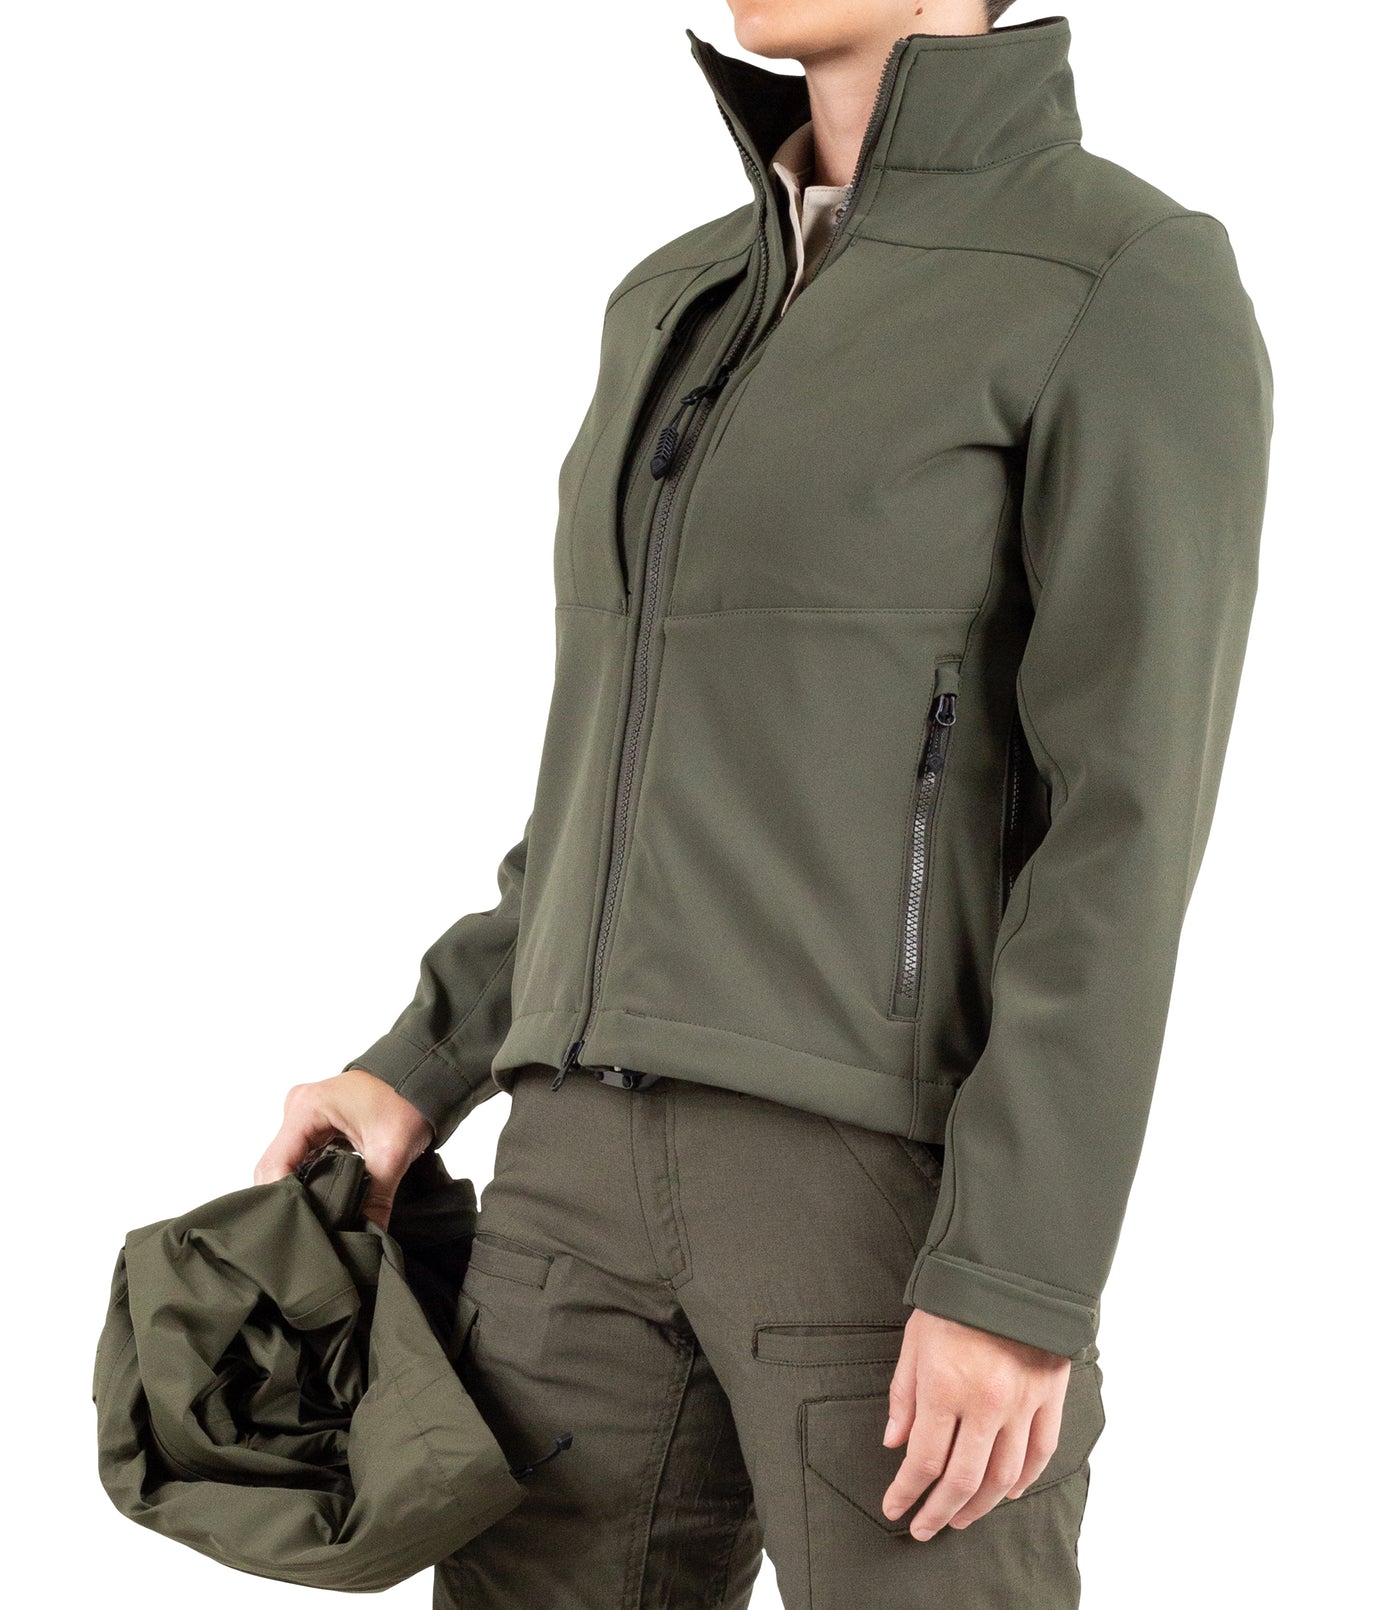 Softshell Jacket for Women’s Tactix System Jacket in OD Green